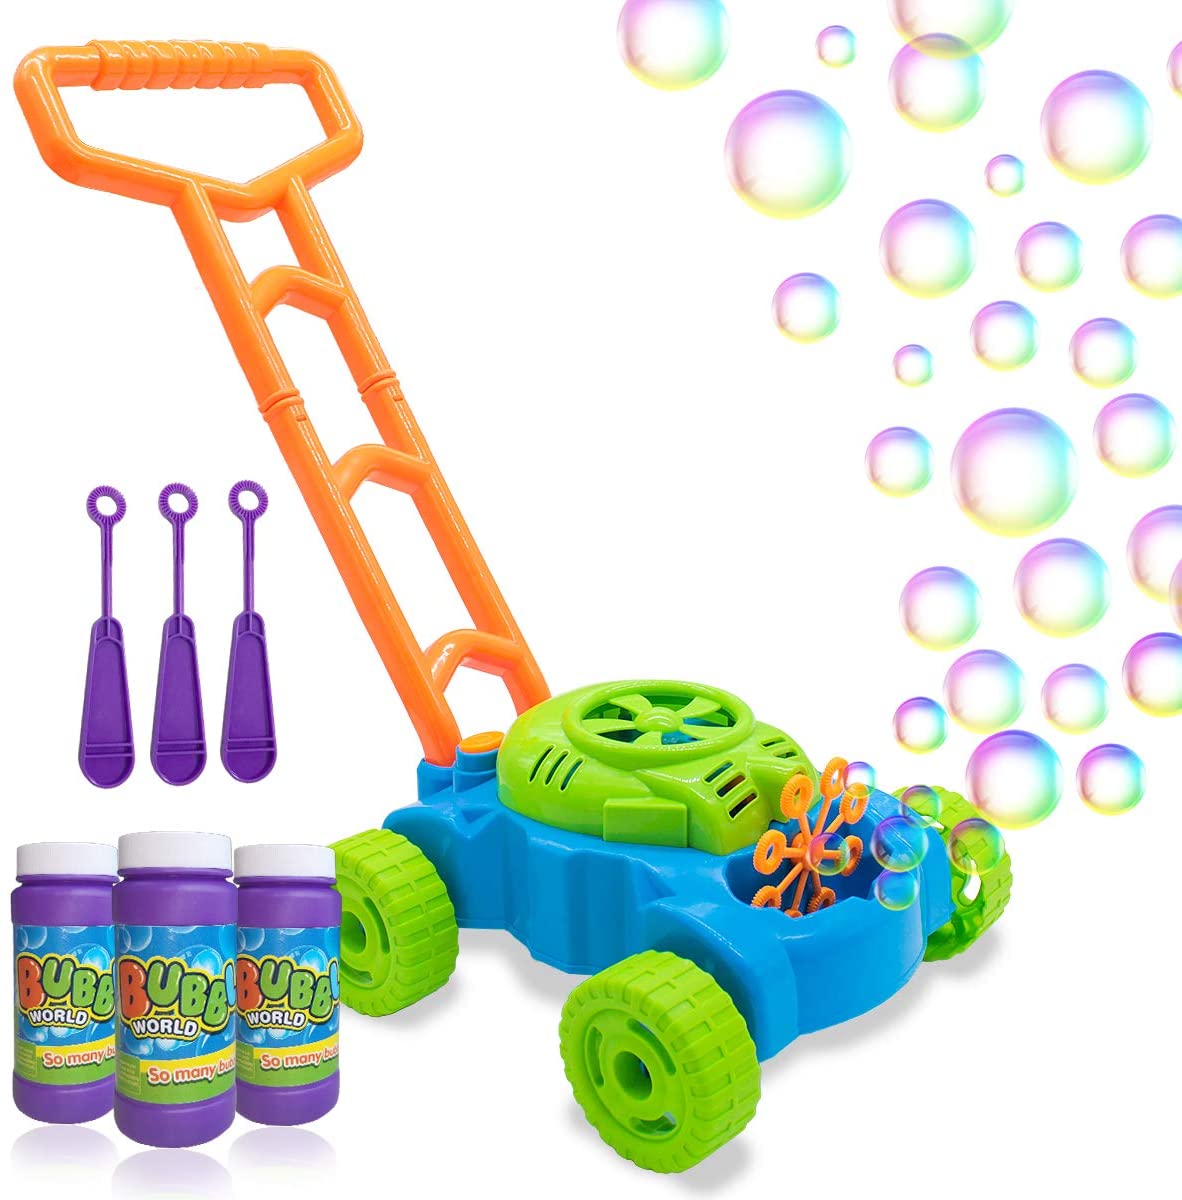 Lydaz Bubble Blowing Push Mower Toddler Yard Toy